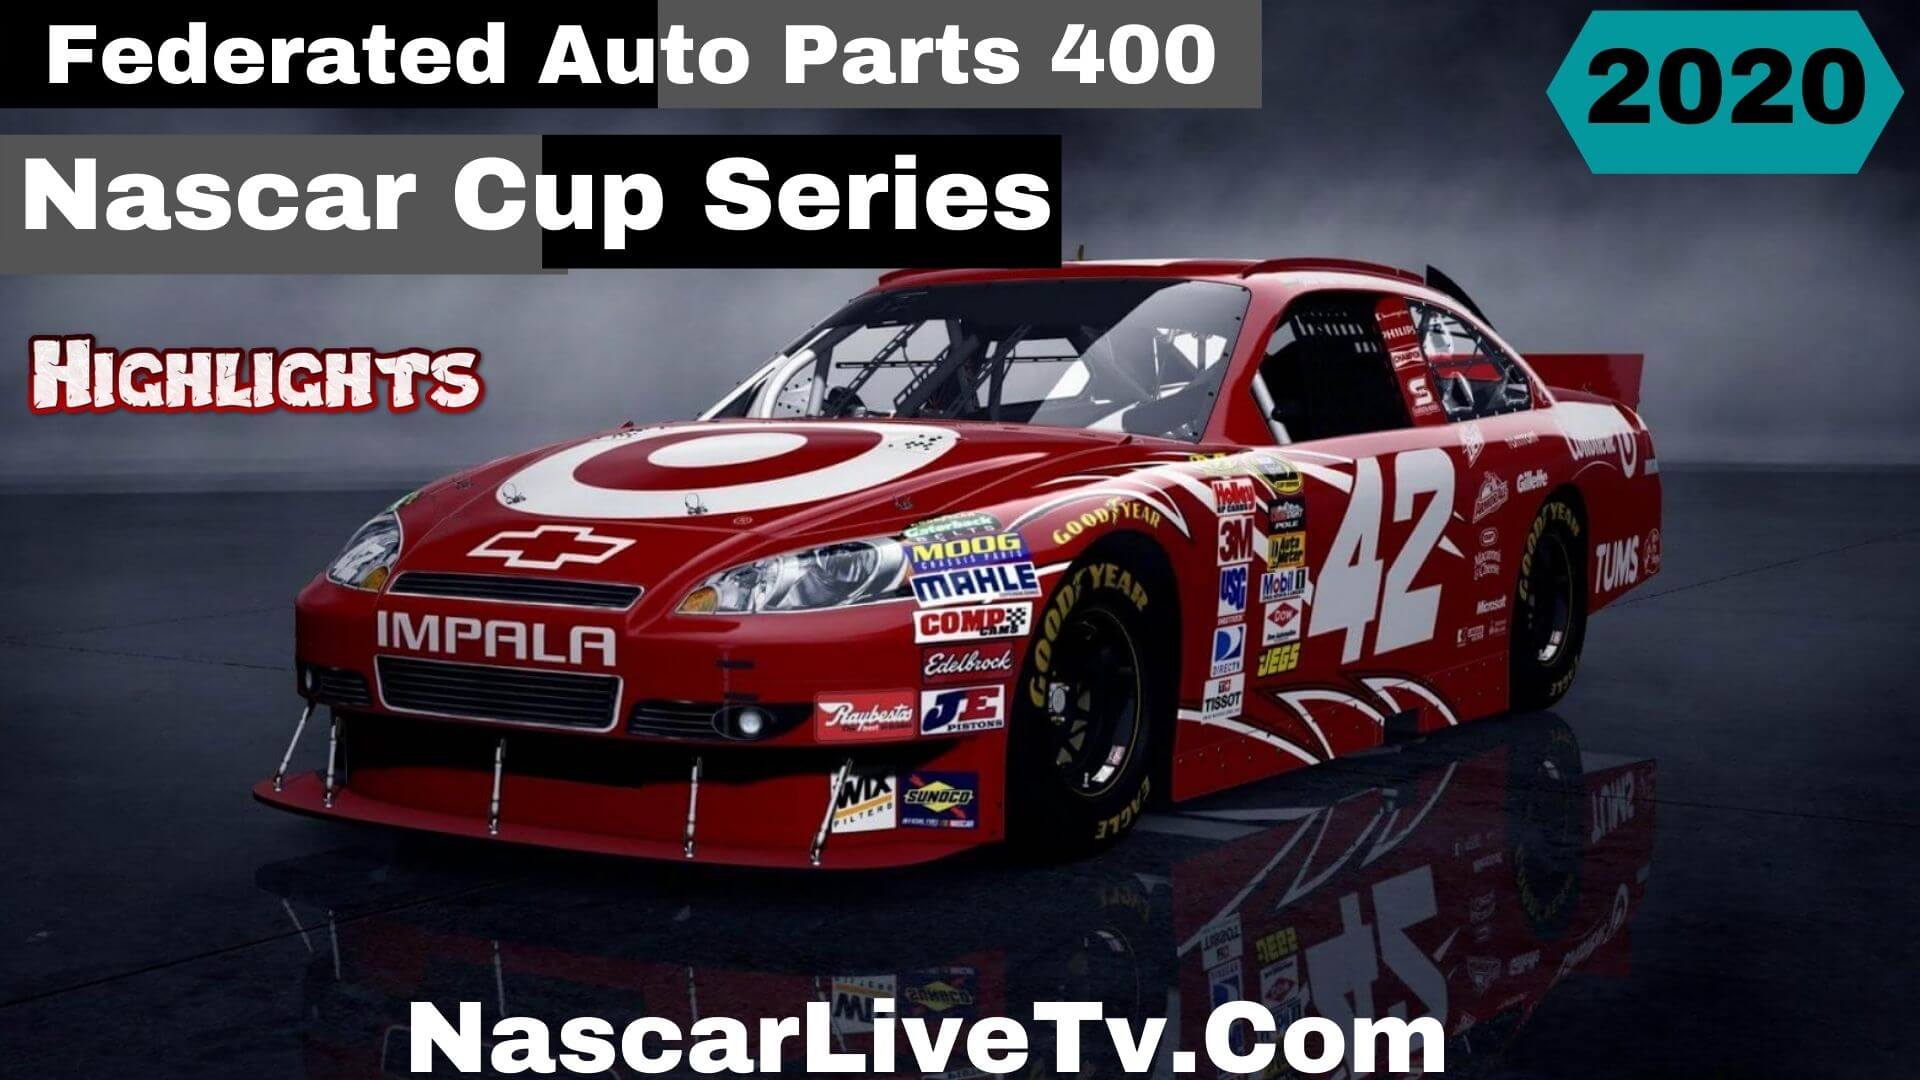 Federated Auto Parts 400 Nascar Cup Series 2020 Highlights